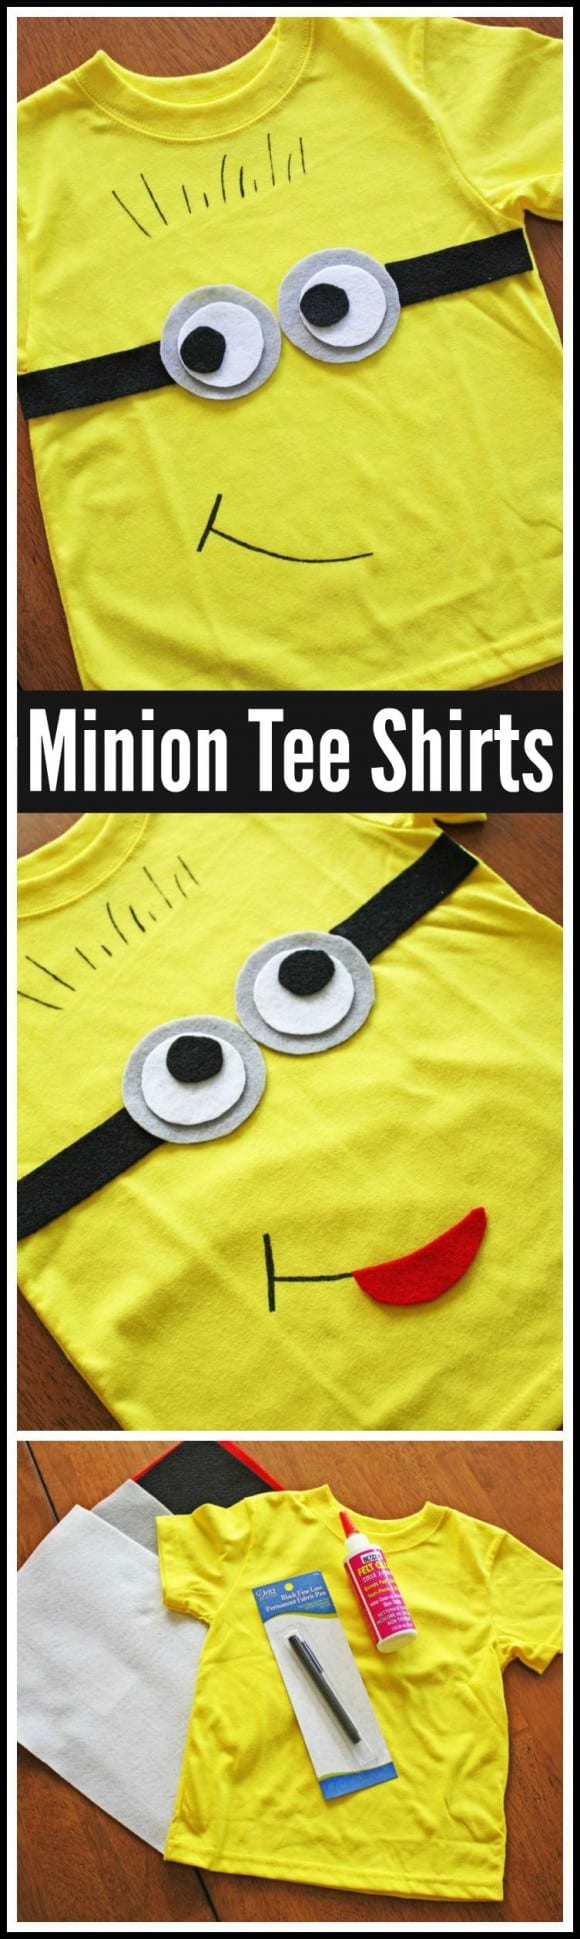 Minions Tee Shirt DIY. Make these as party favors or a party craft at your Minion birthday party! |CatchMyParty.com